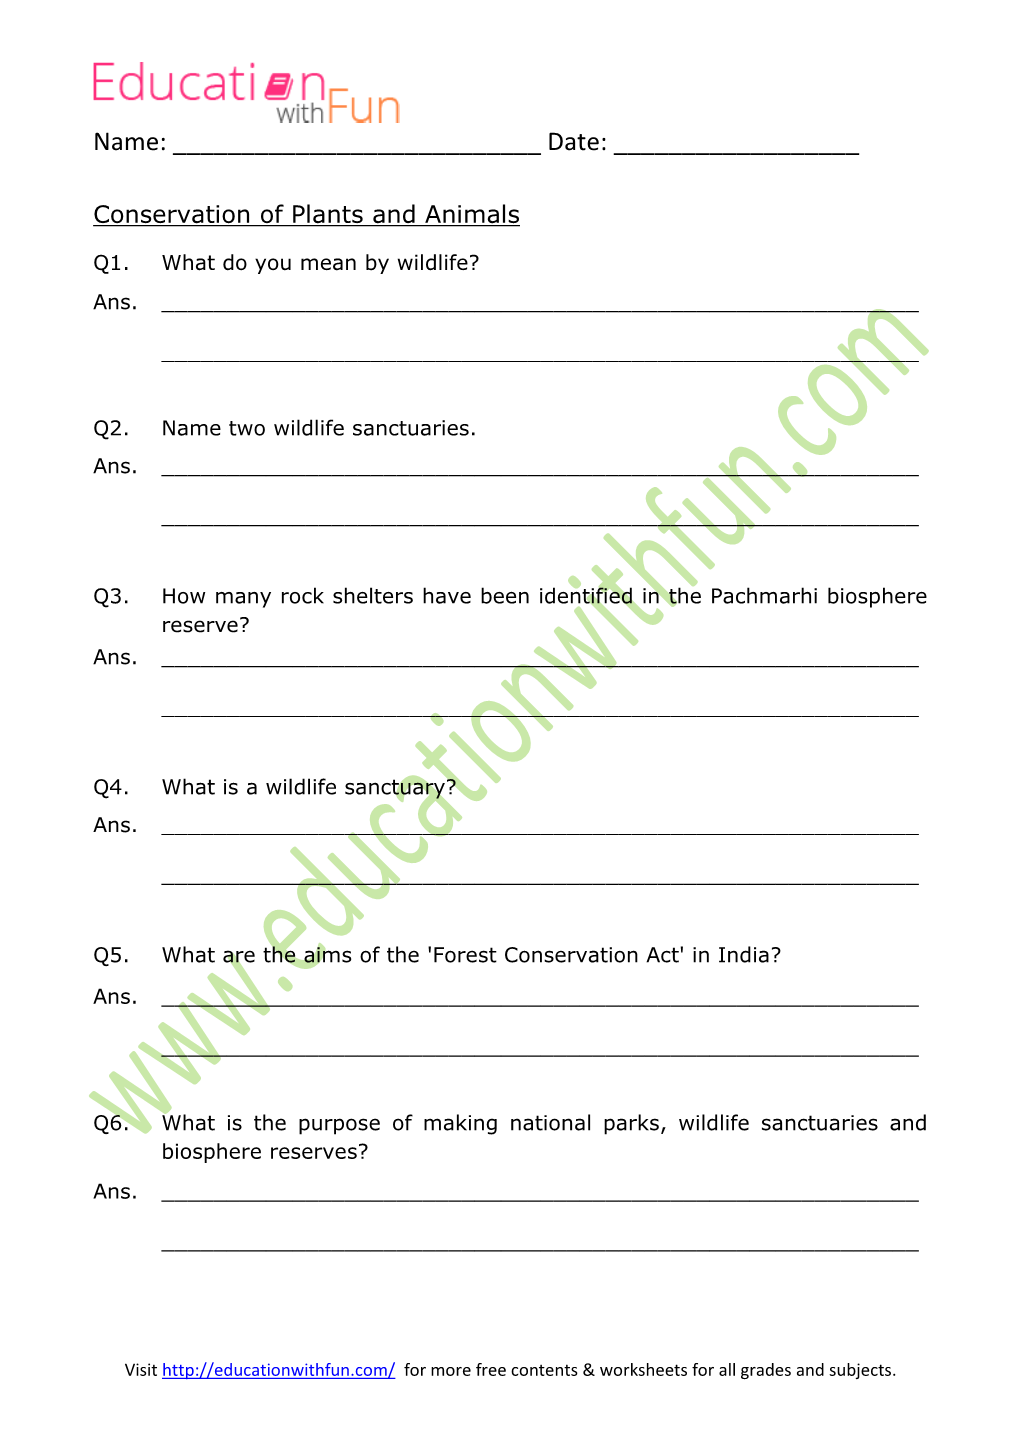 Conservation of Plants and Animals Worksheet 3.Pdf